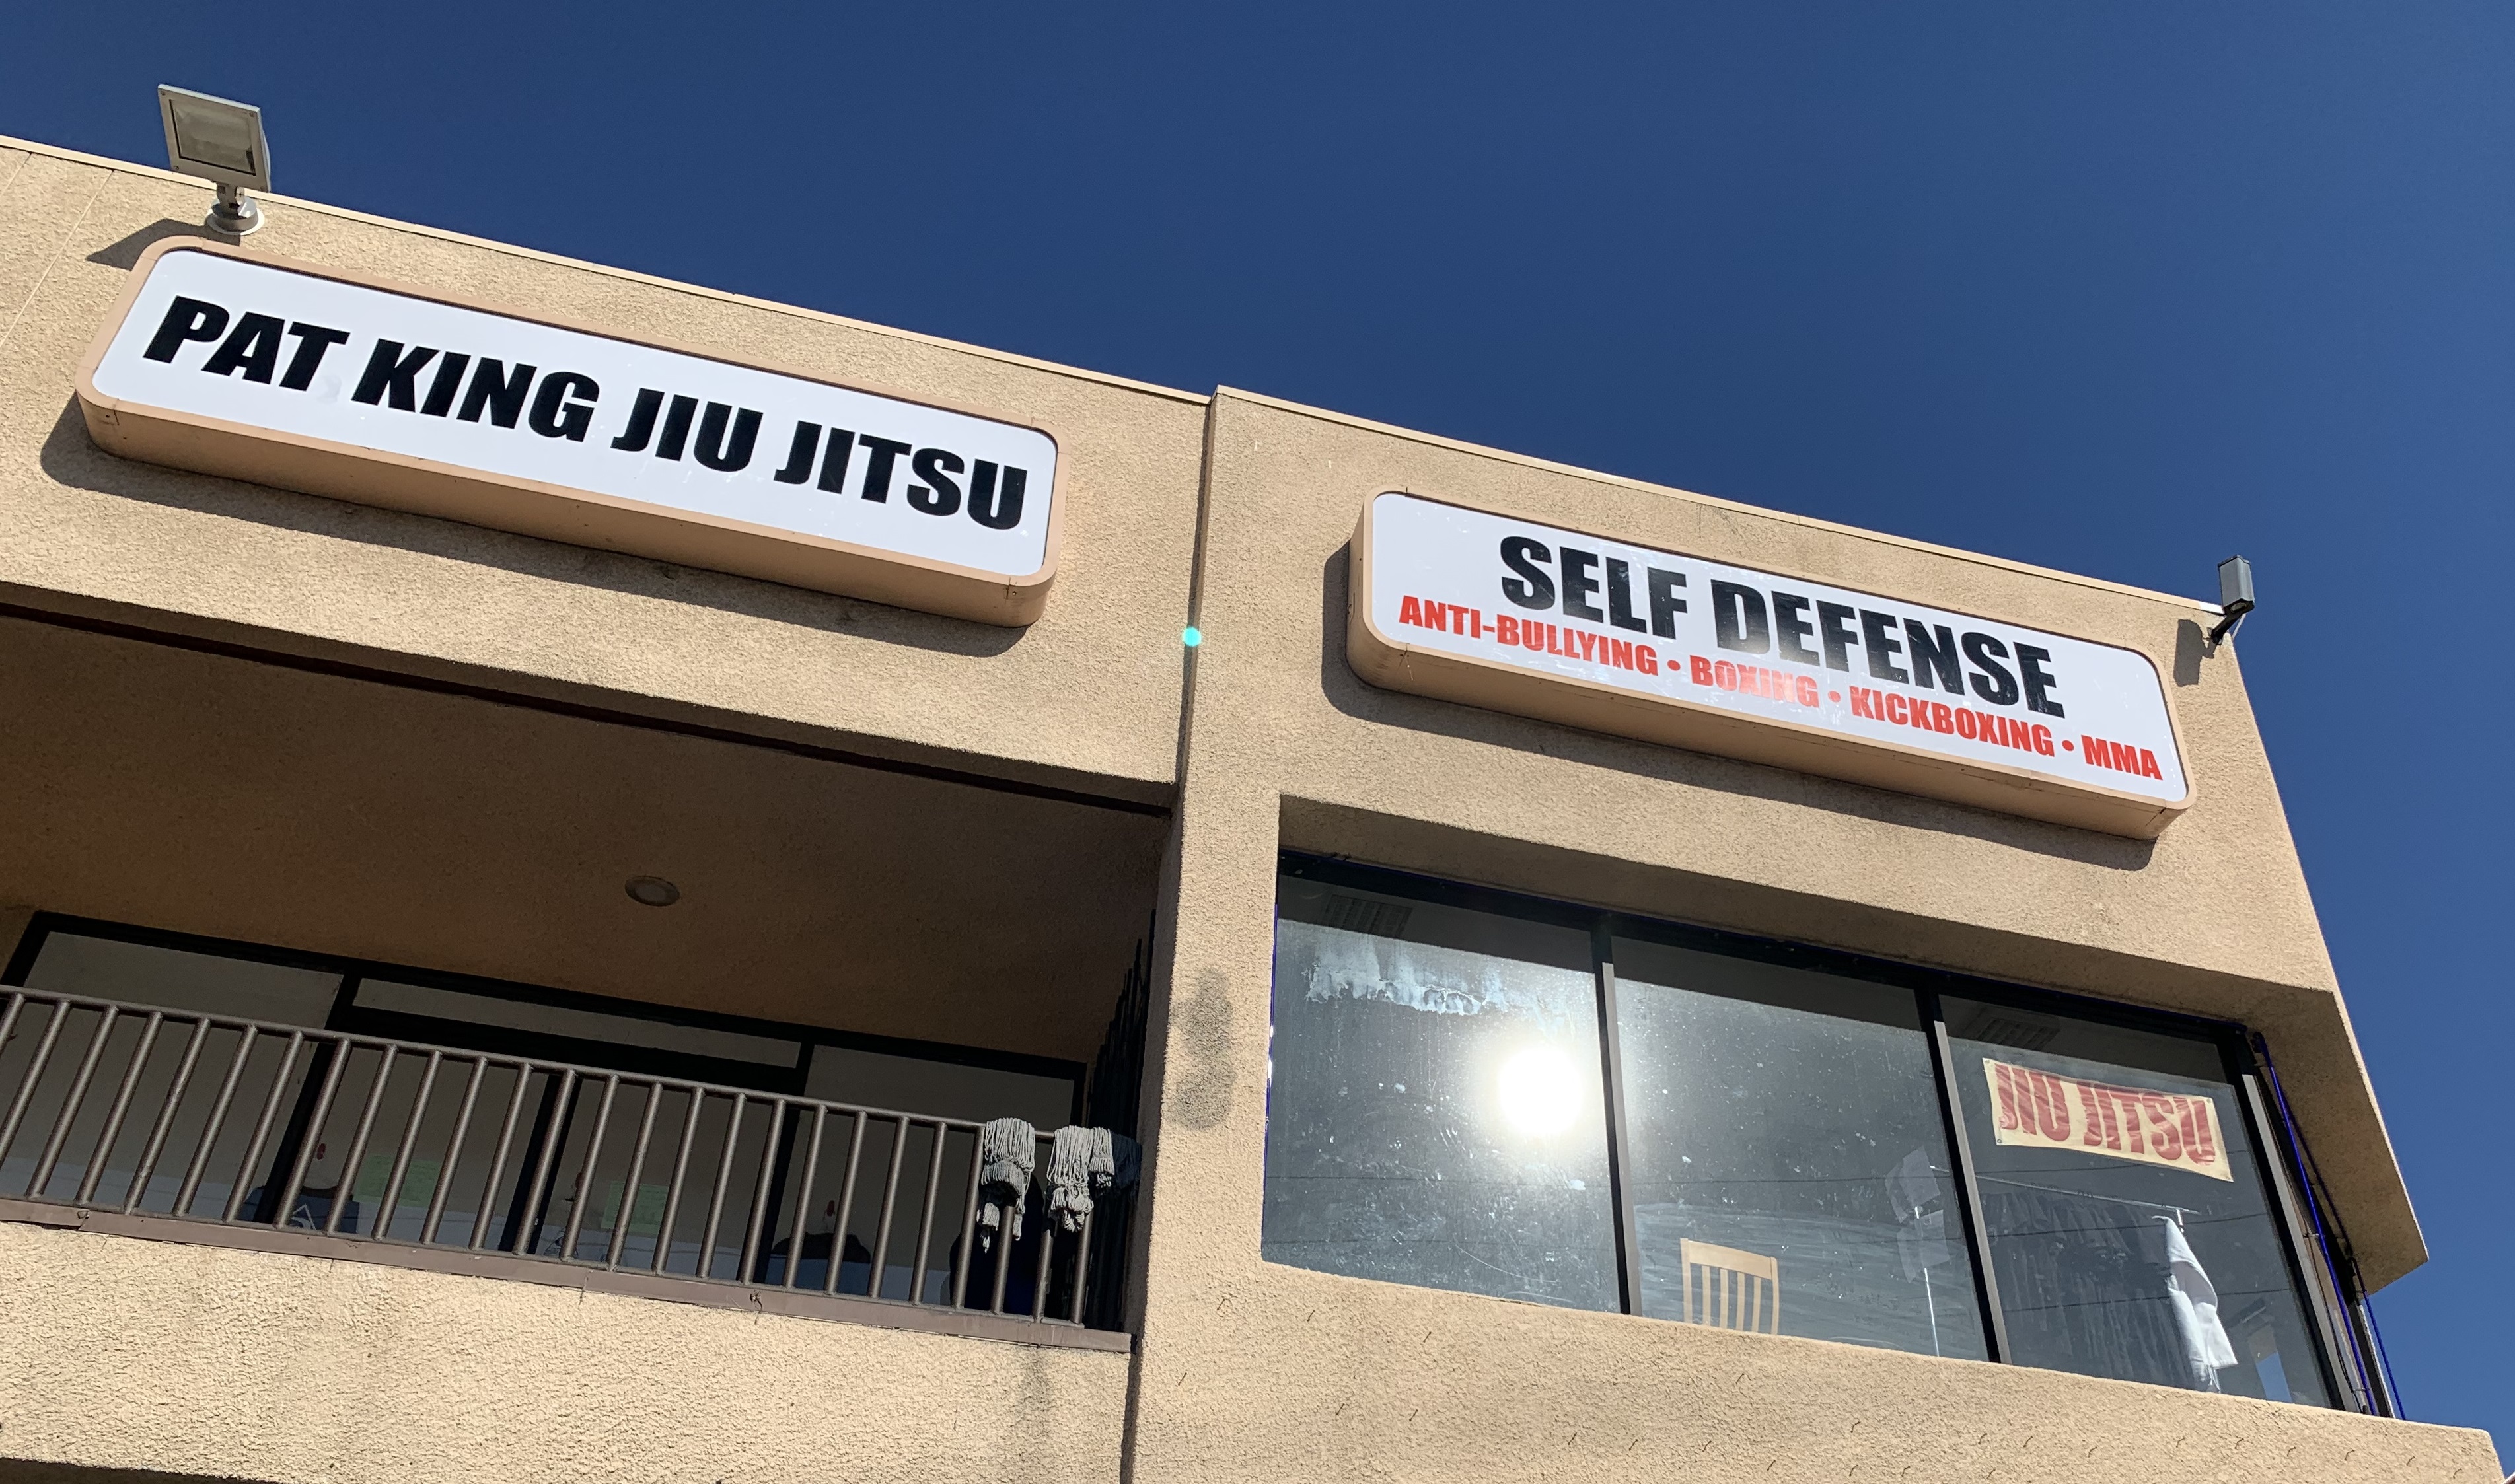 You are currently viewing Lightbox Gym Signs for Pat King Jiu Jitsu in Northridge